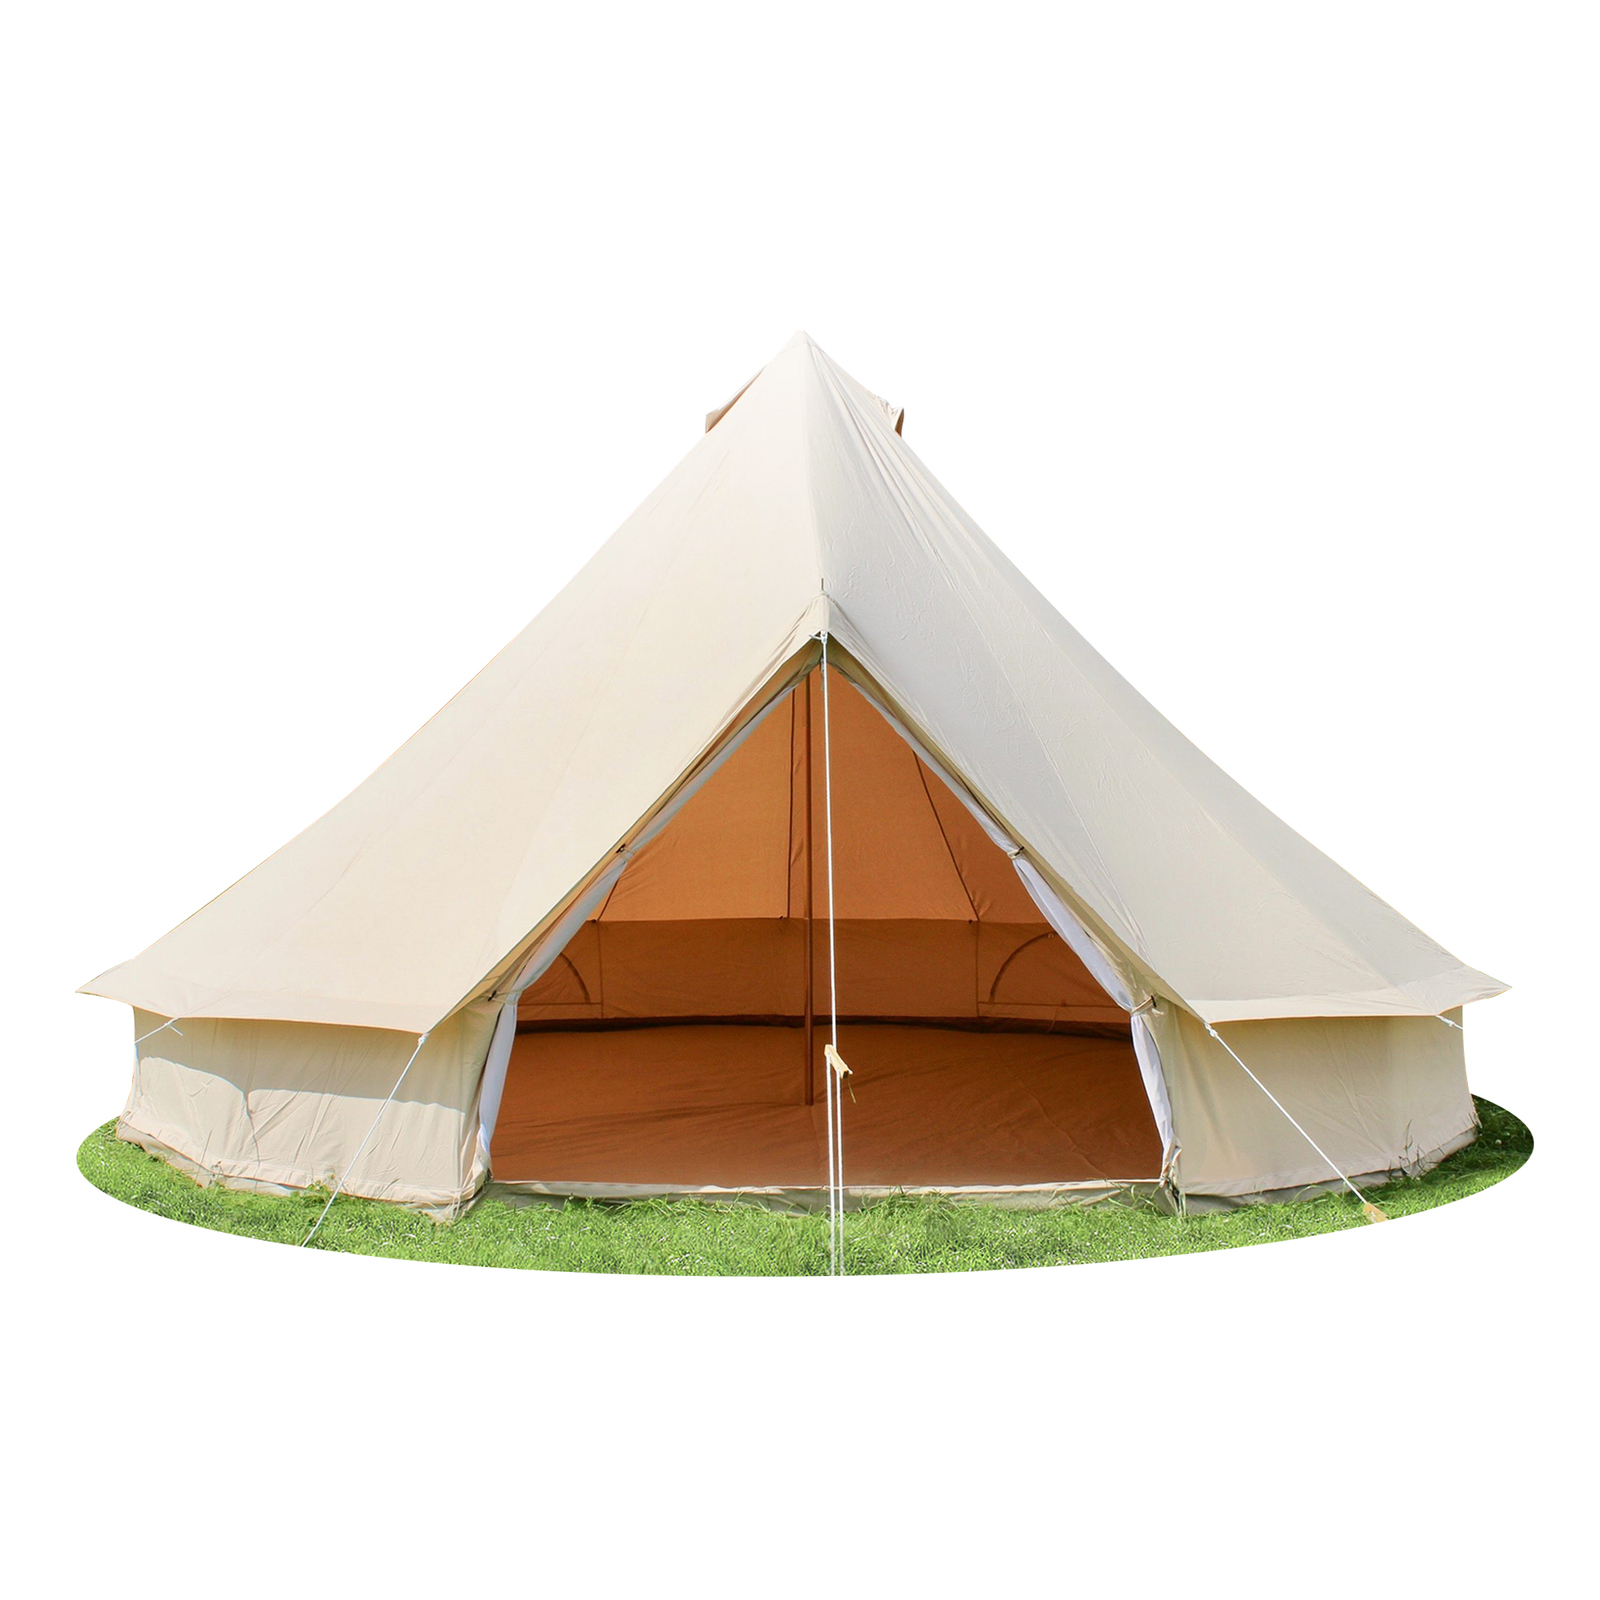 3M 4-Season Bell Tent Waterproof Canvas Glamping Yurt Teepee Tents Commercial Grade Belltent